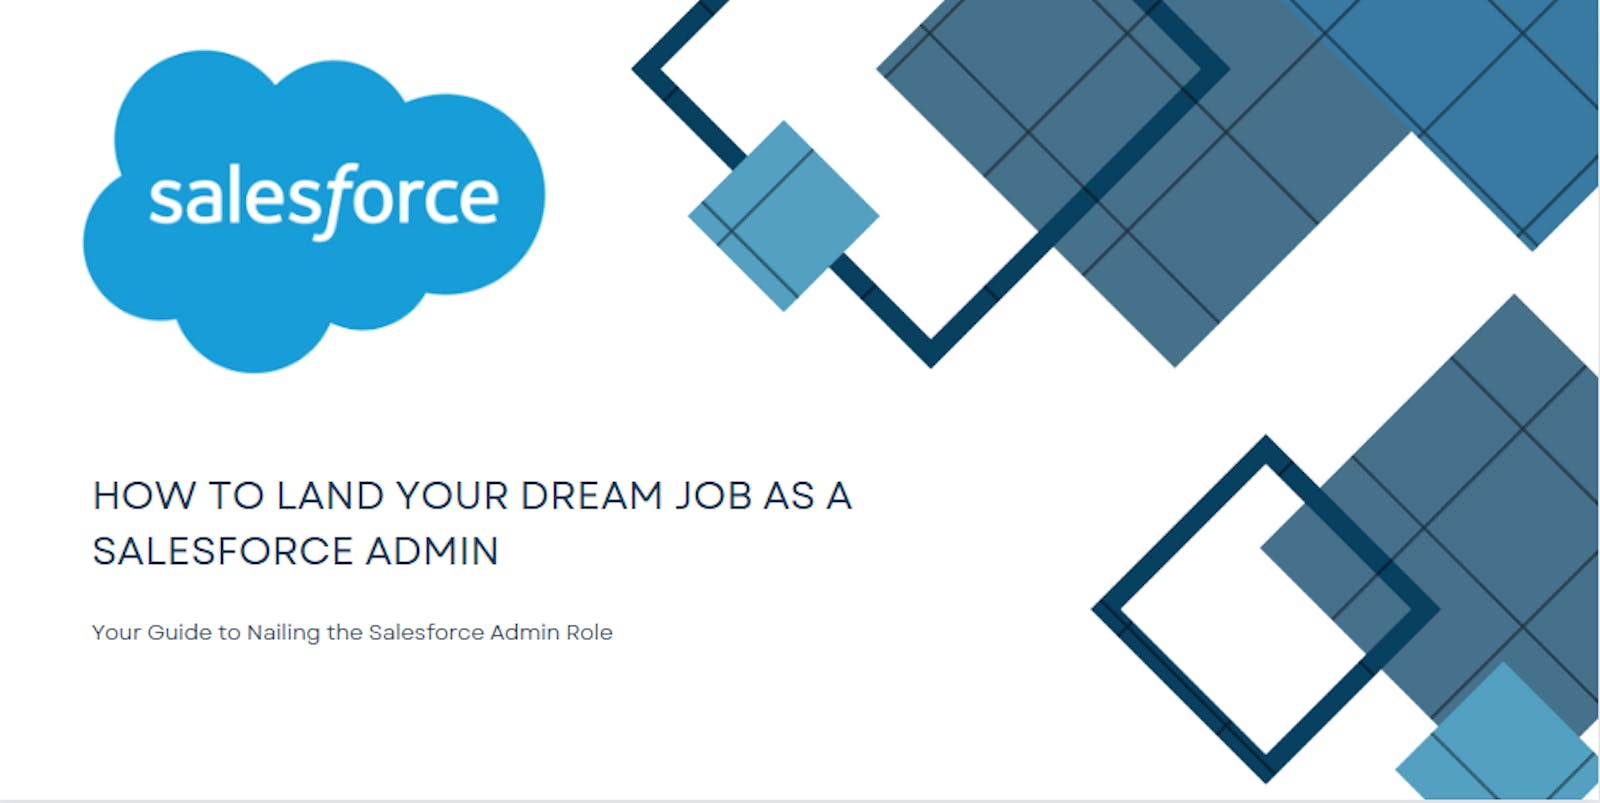 How to Land Your Dream Job as a Salesforce Admin